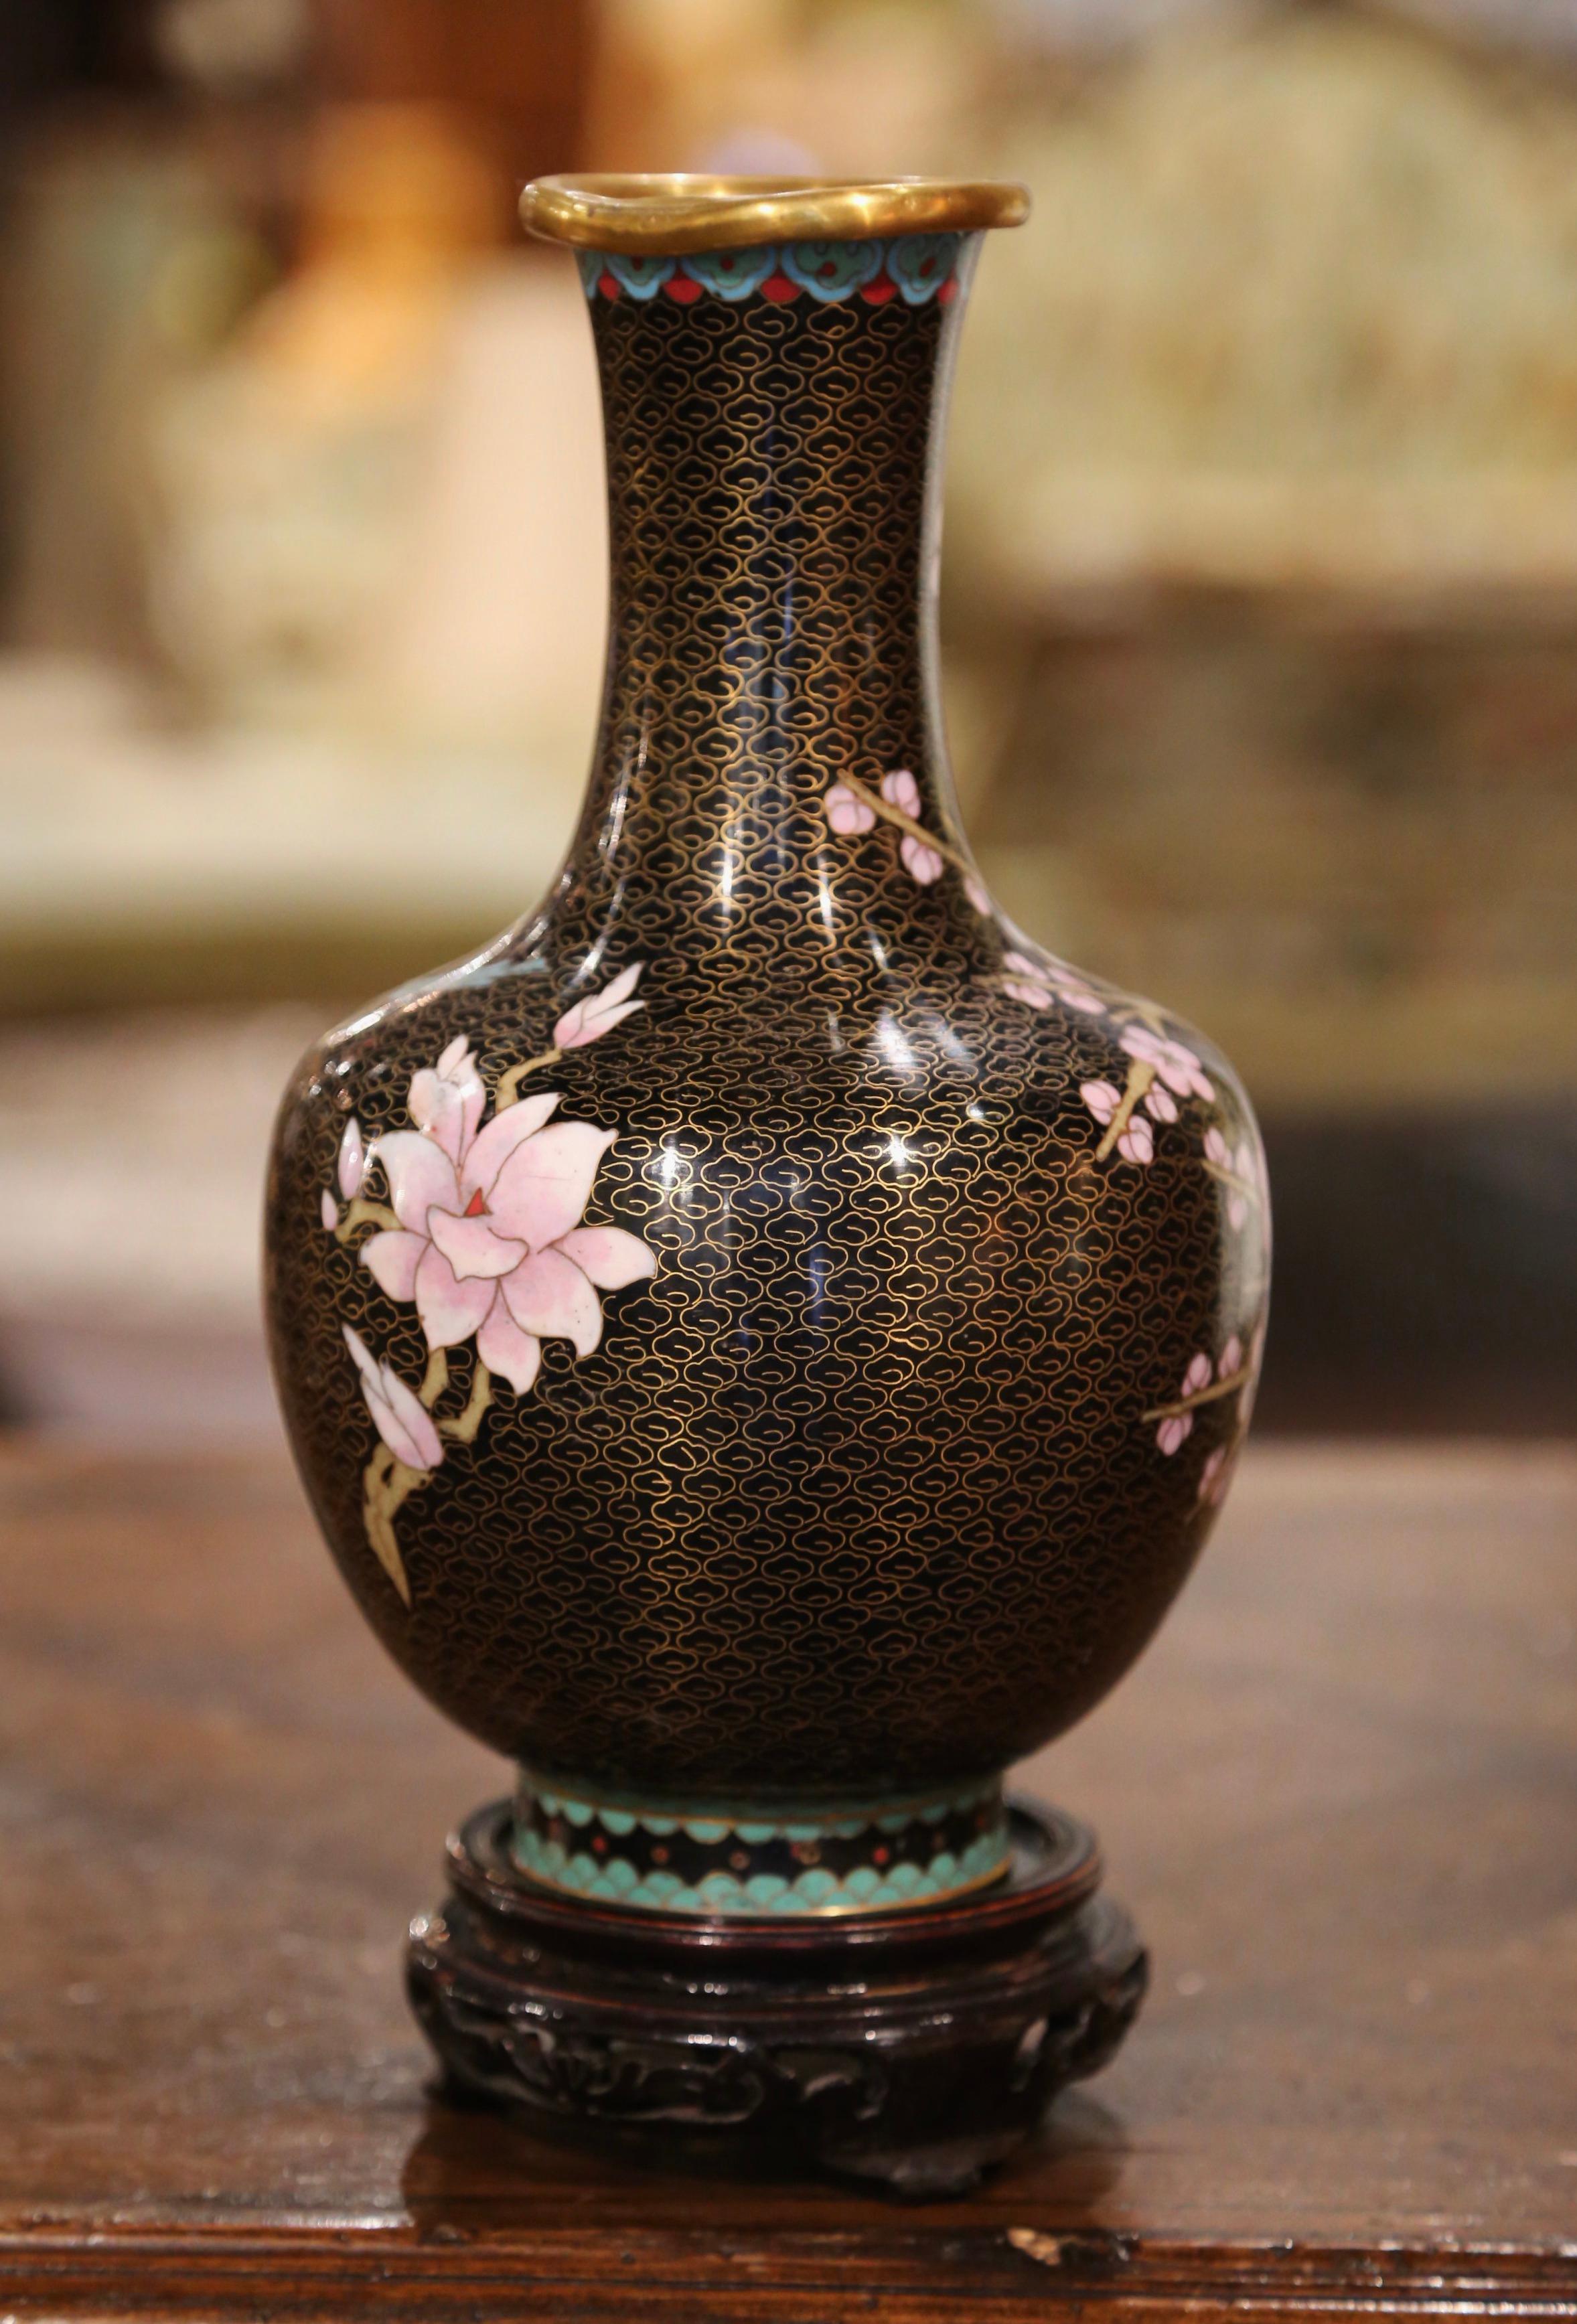 20th Century  Vintage Chinese Cloisonne Enamel Vase with Floral Motifs on Wooden Stand For Sale